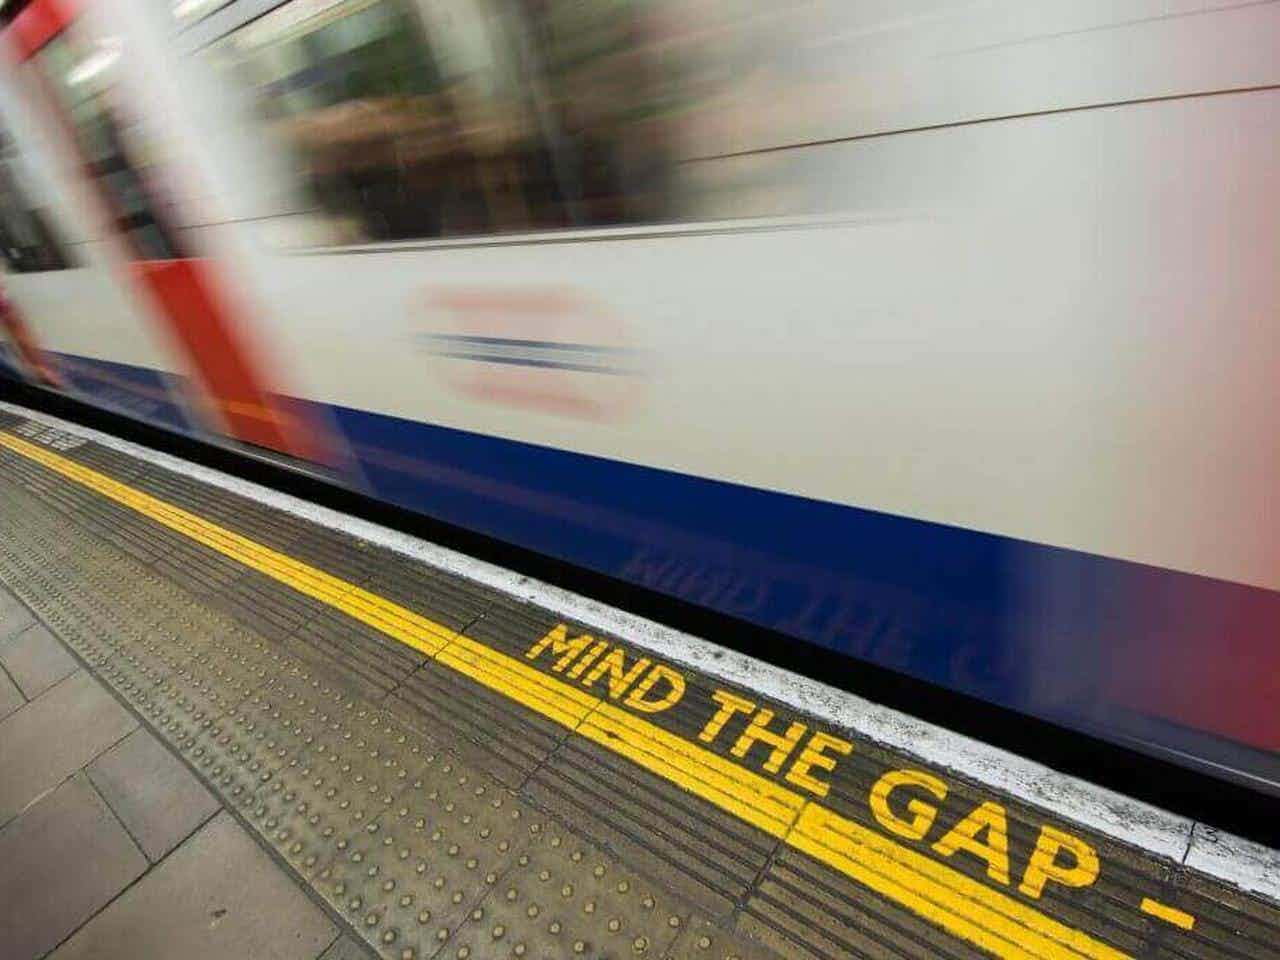 cover photo for Mind the Gap, written by Mitch Johnson